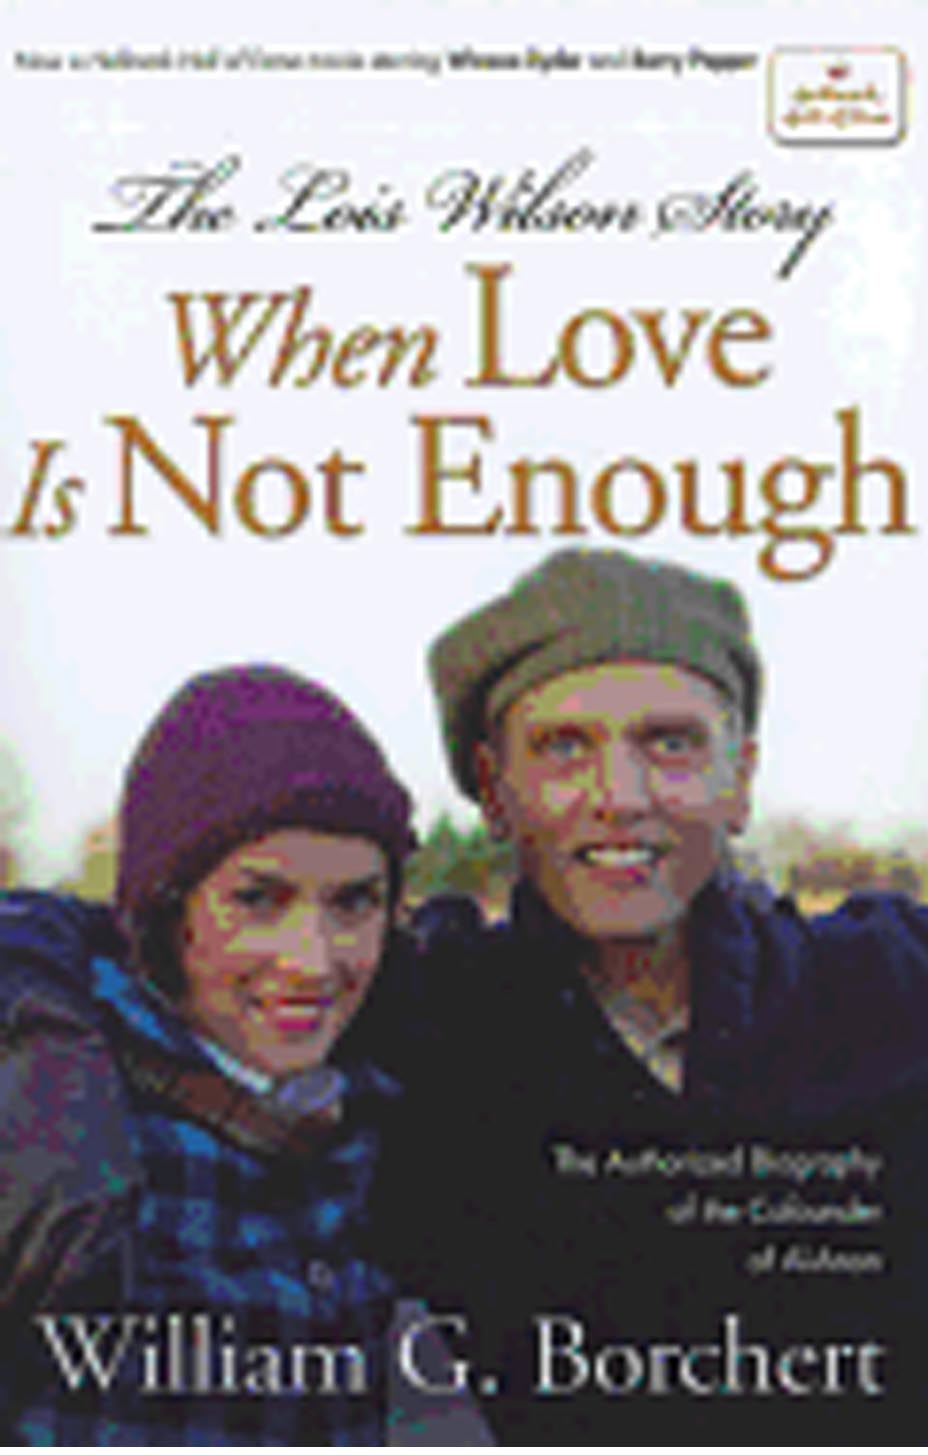 When Love Is Not Enough: The Lois Wilson Story by William G. Borchert 108-9781592859801